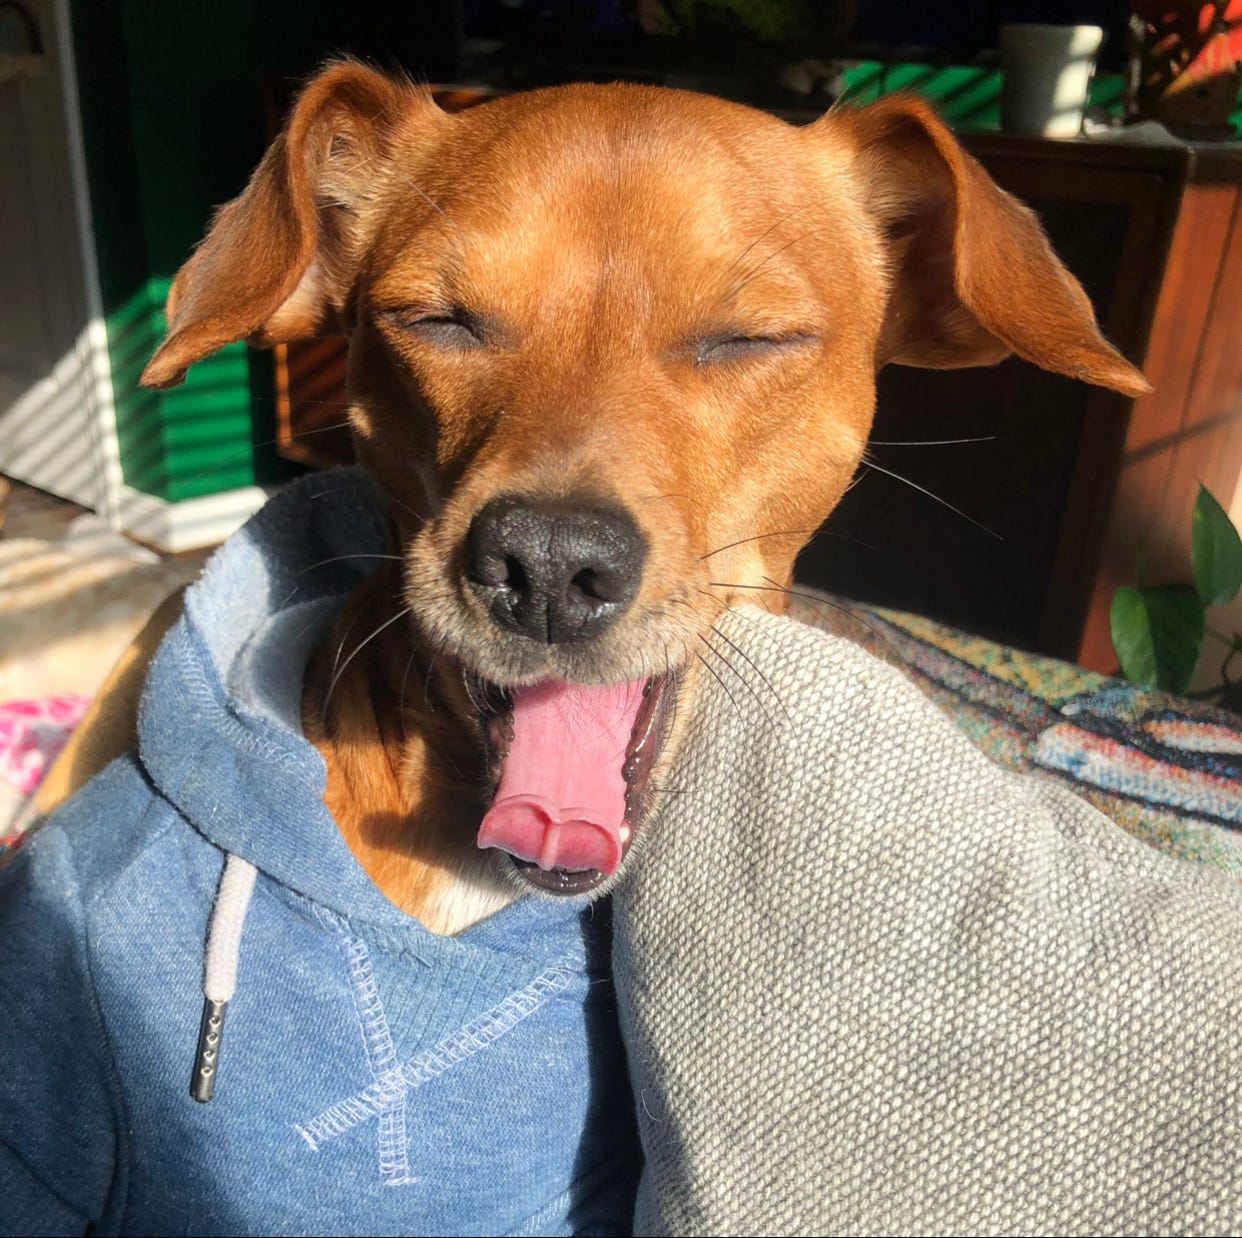 A small brown dog in the sun with her eyes closed, her mouth open, and her tongue out in a yawn